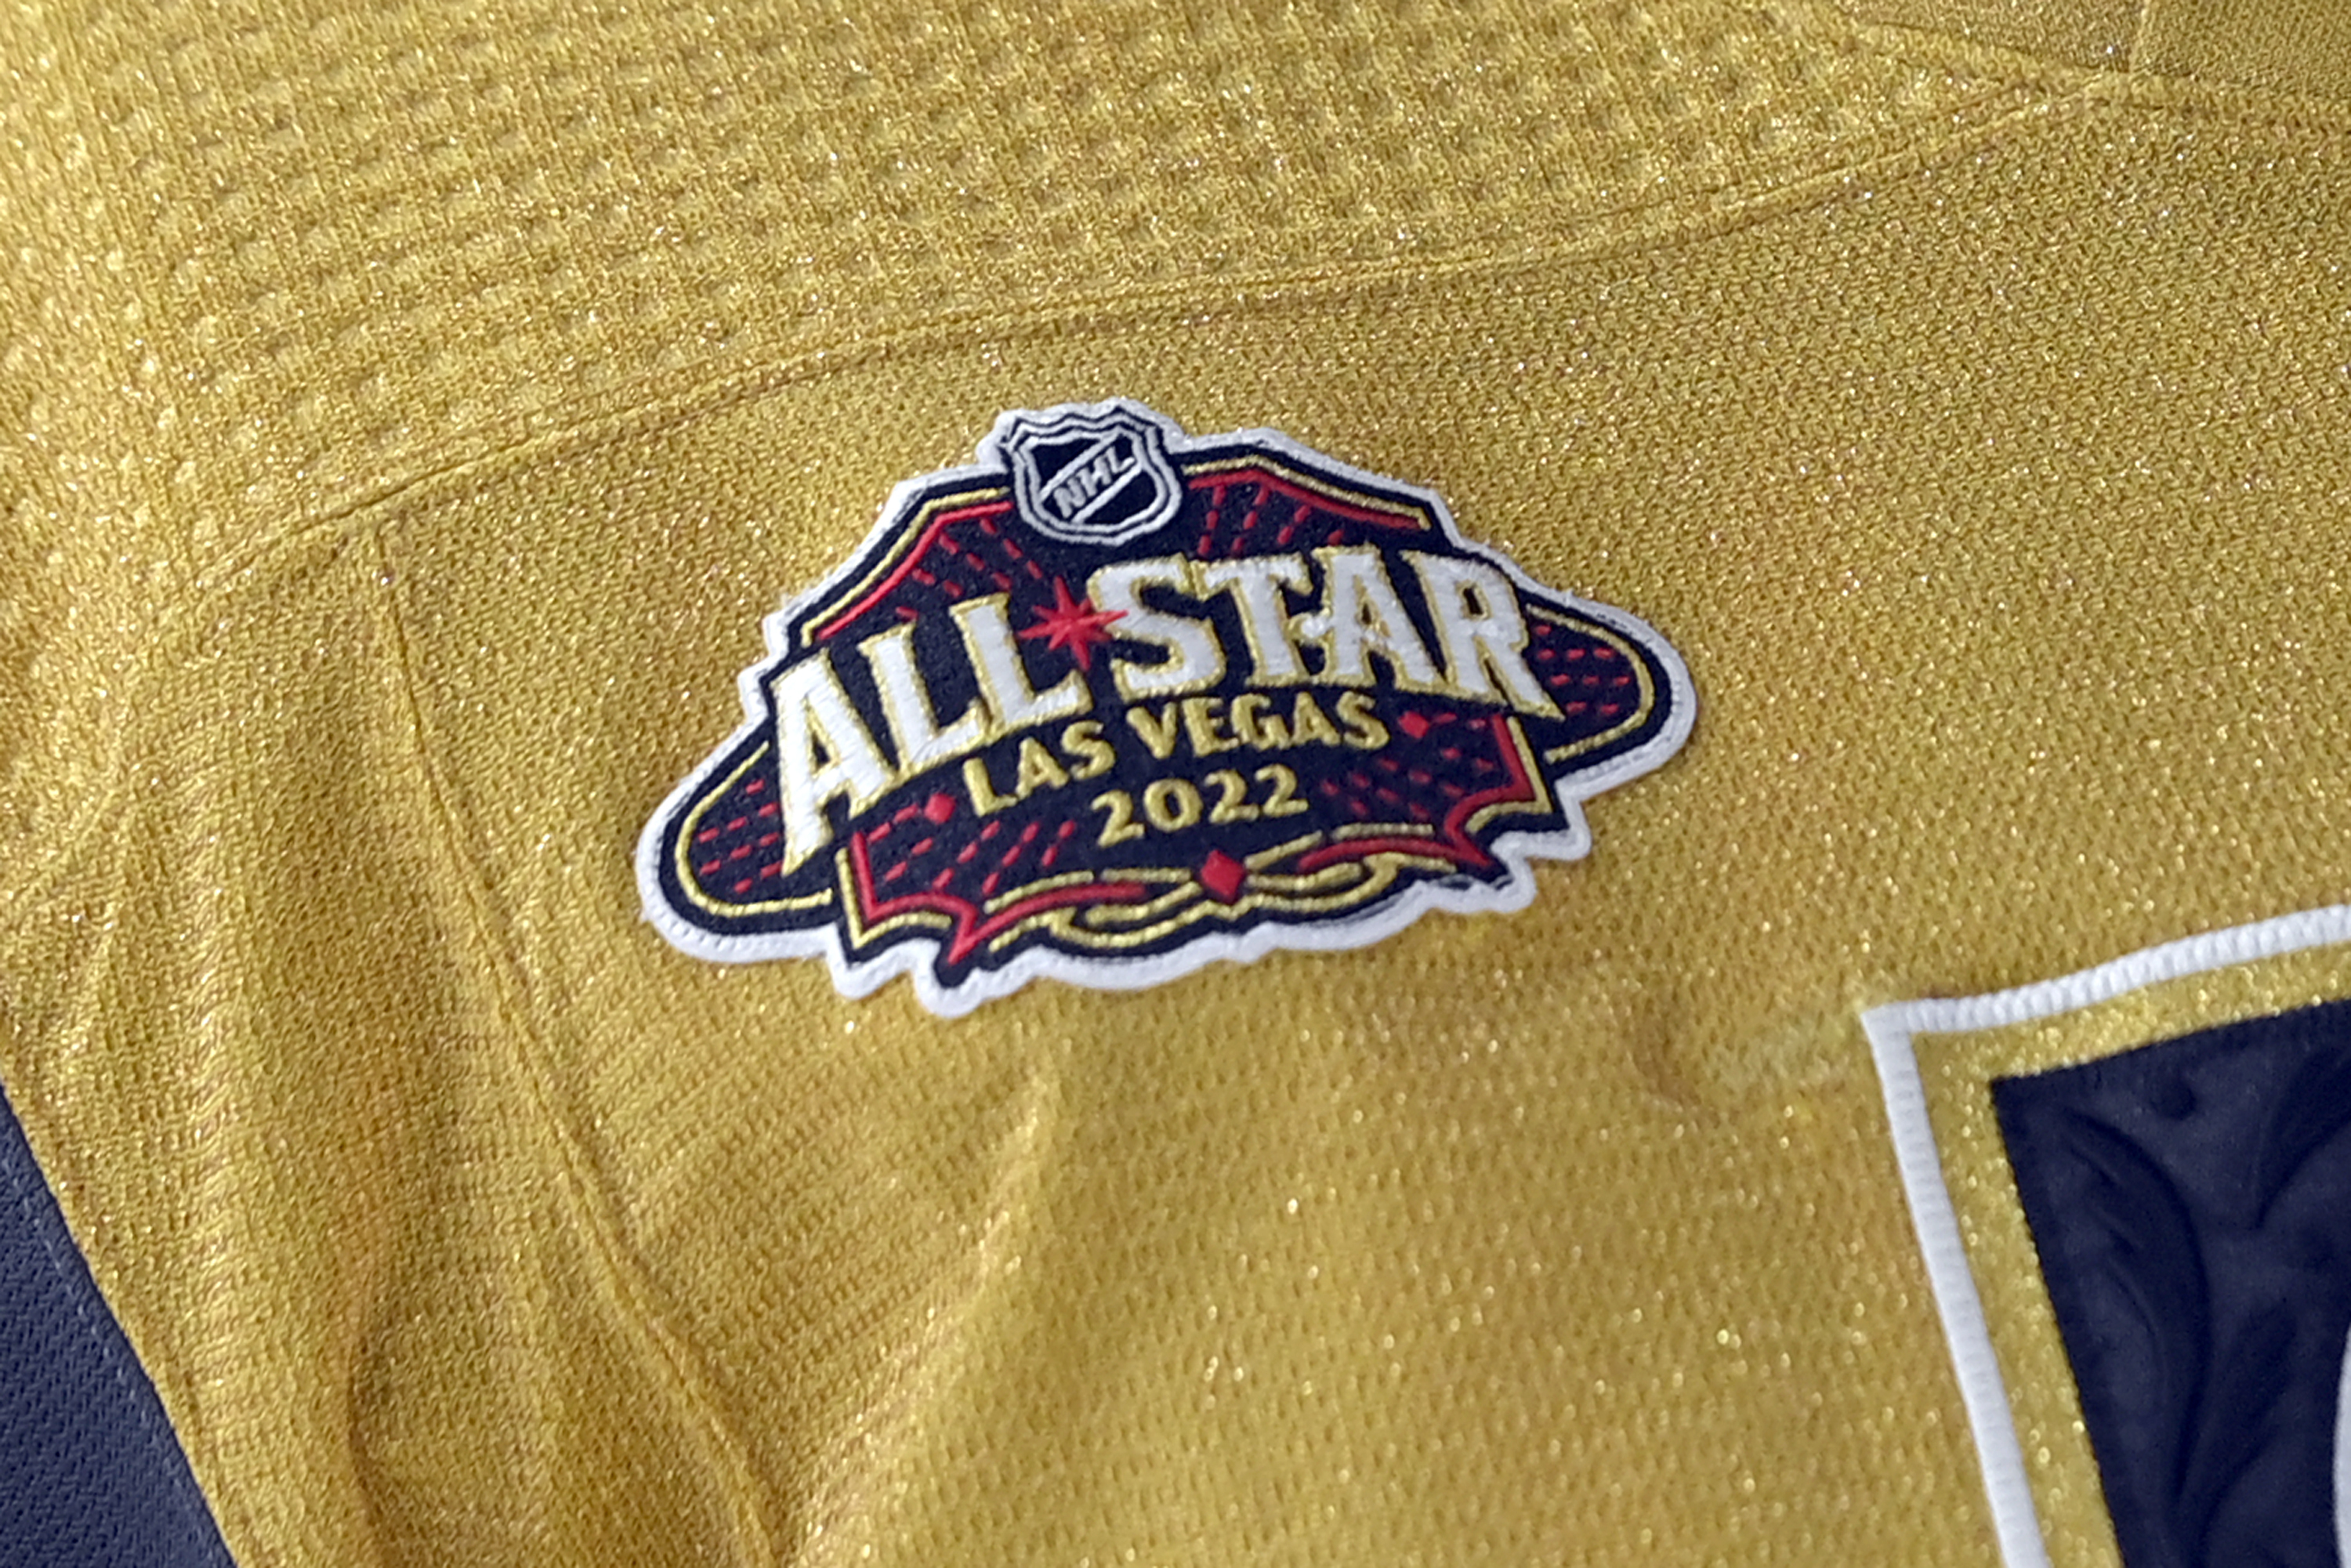 NHL All-Star Game ratings down, SuperSkills up - Sports Media Watch